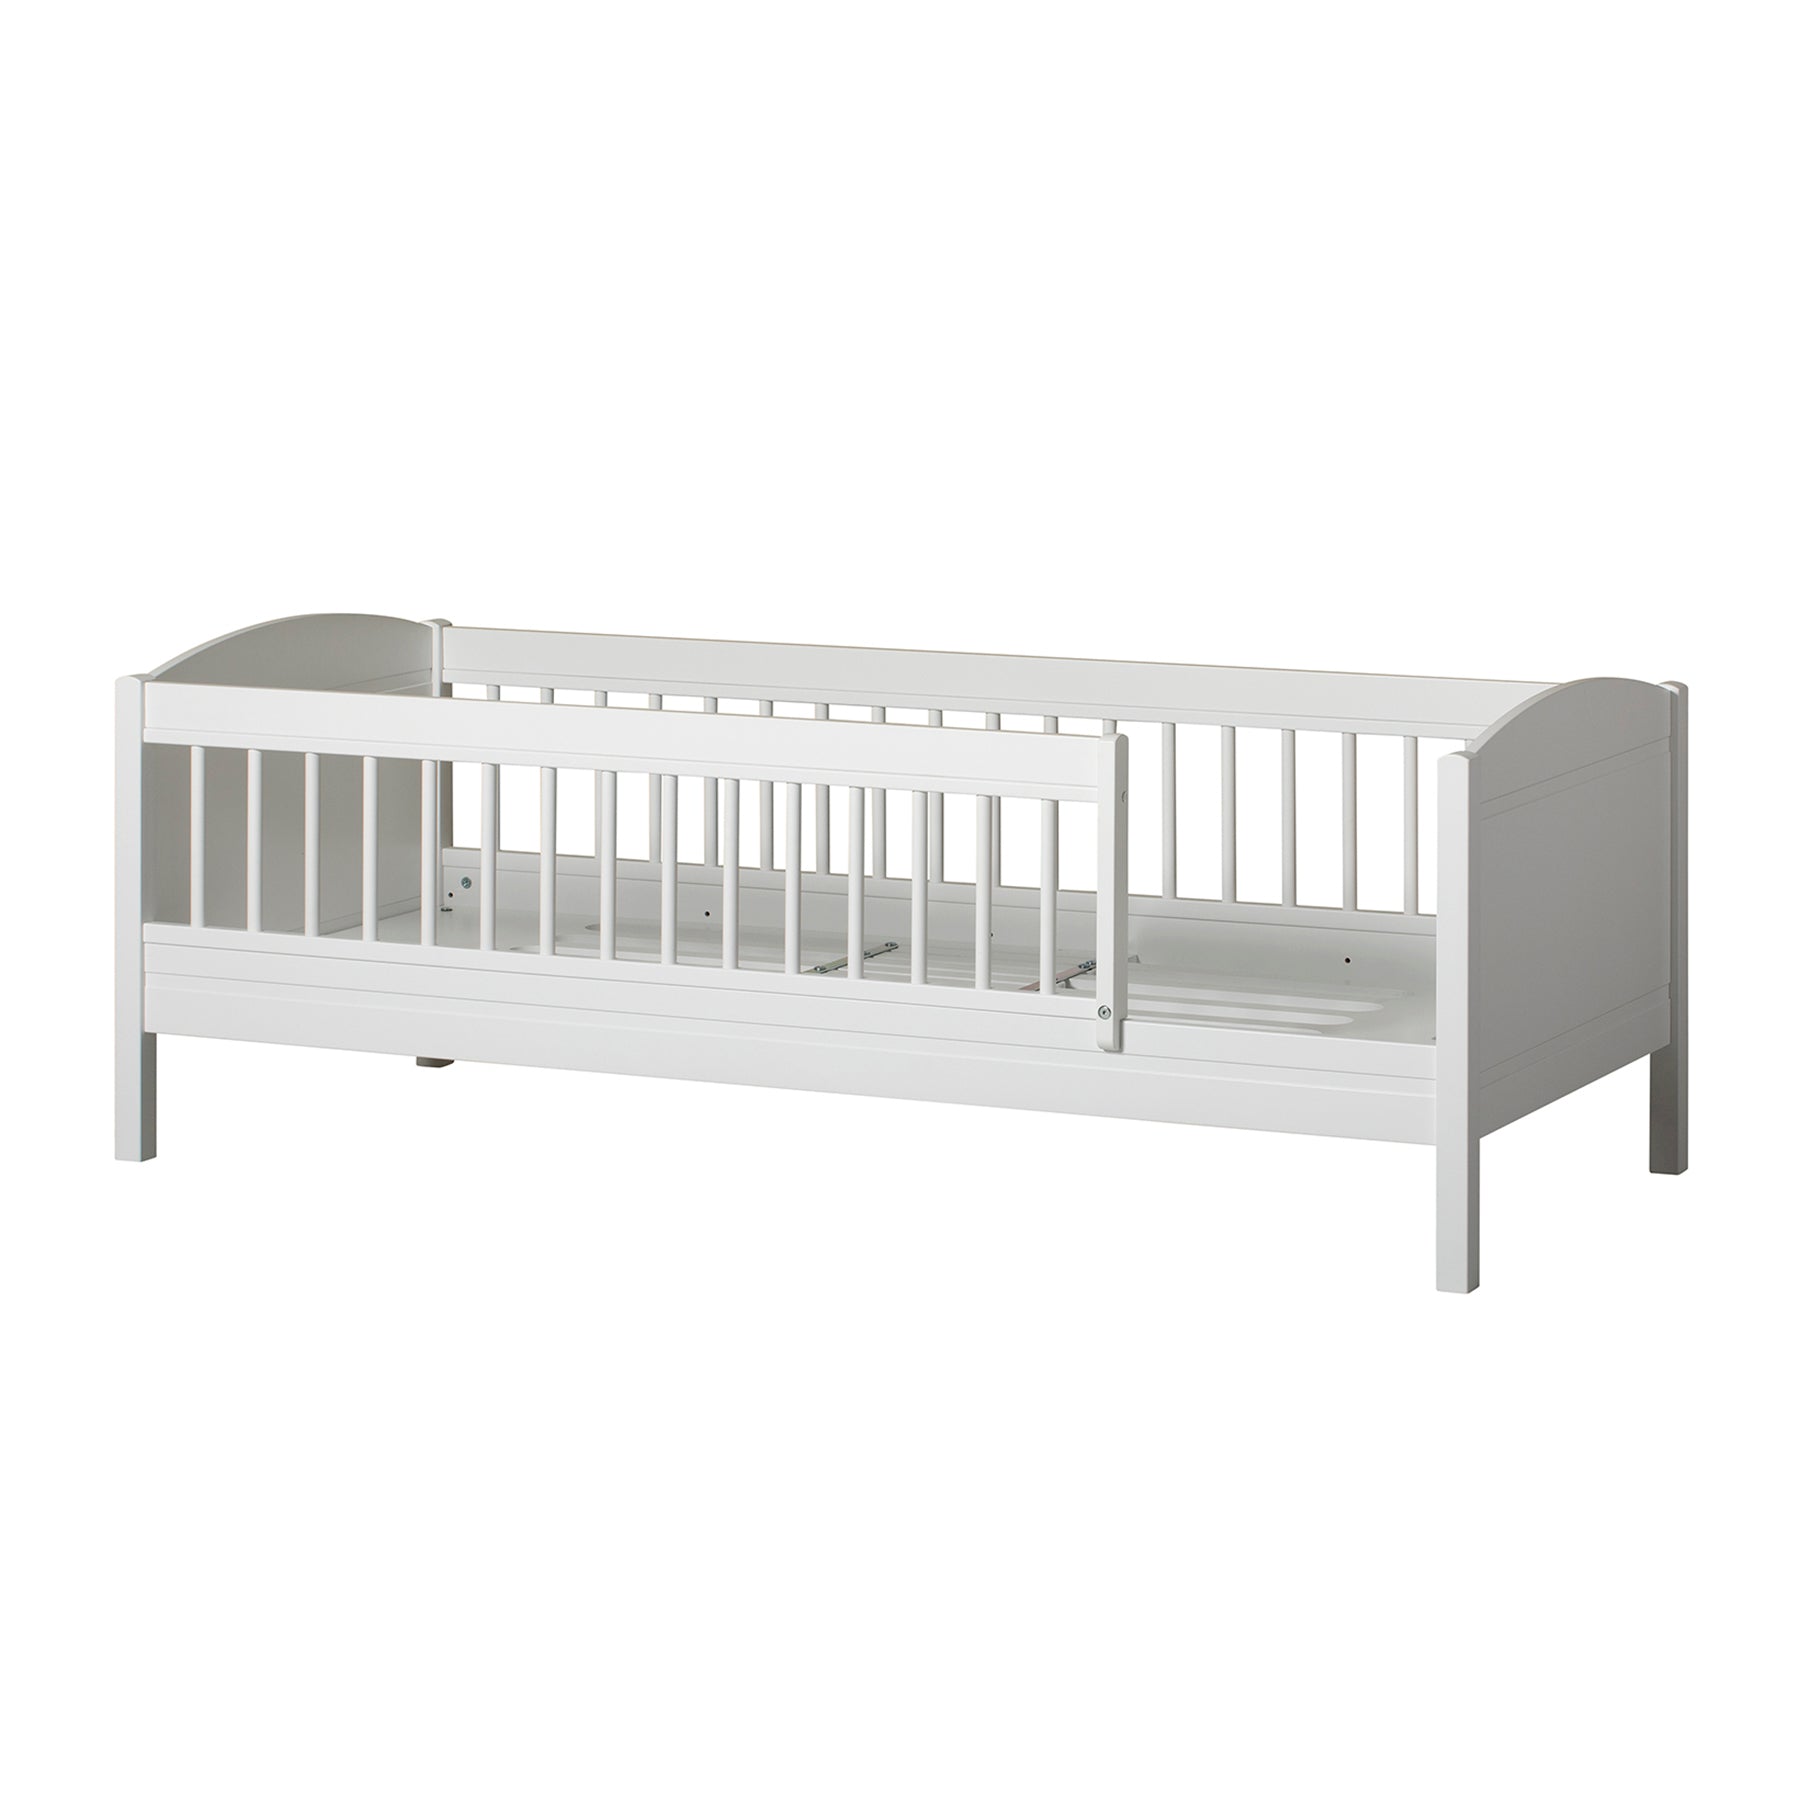 Oliver Furniture Seaside Lille+ baby and children's bed 0-9 years